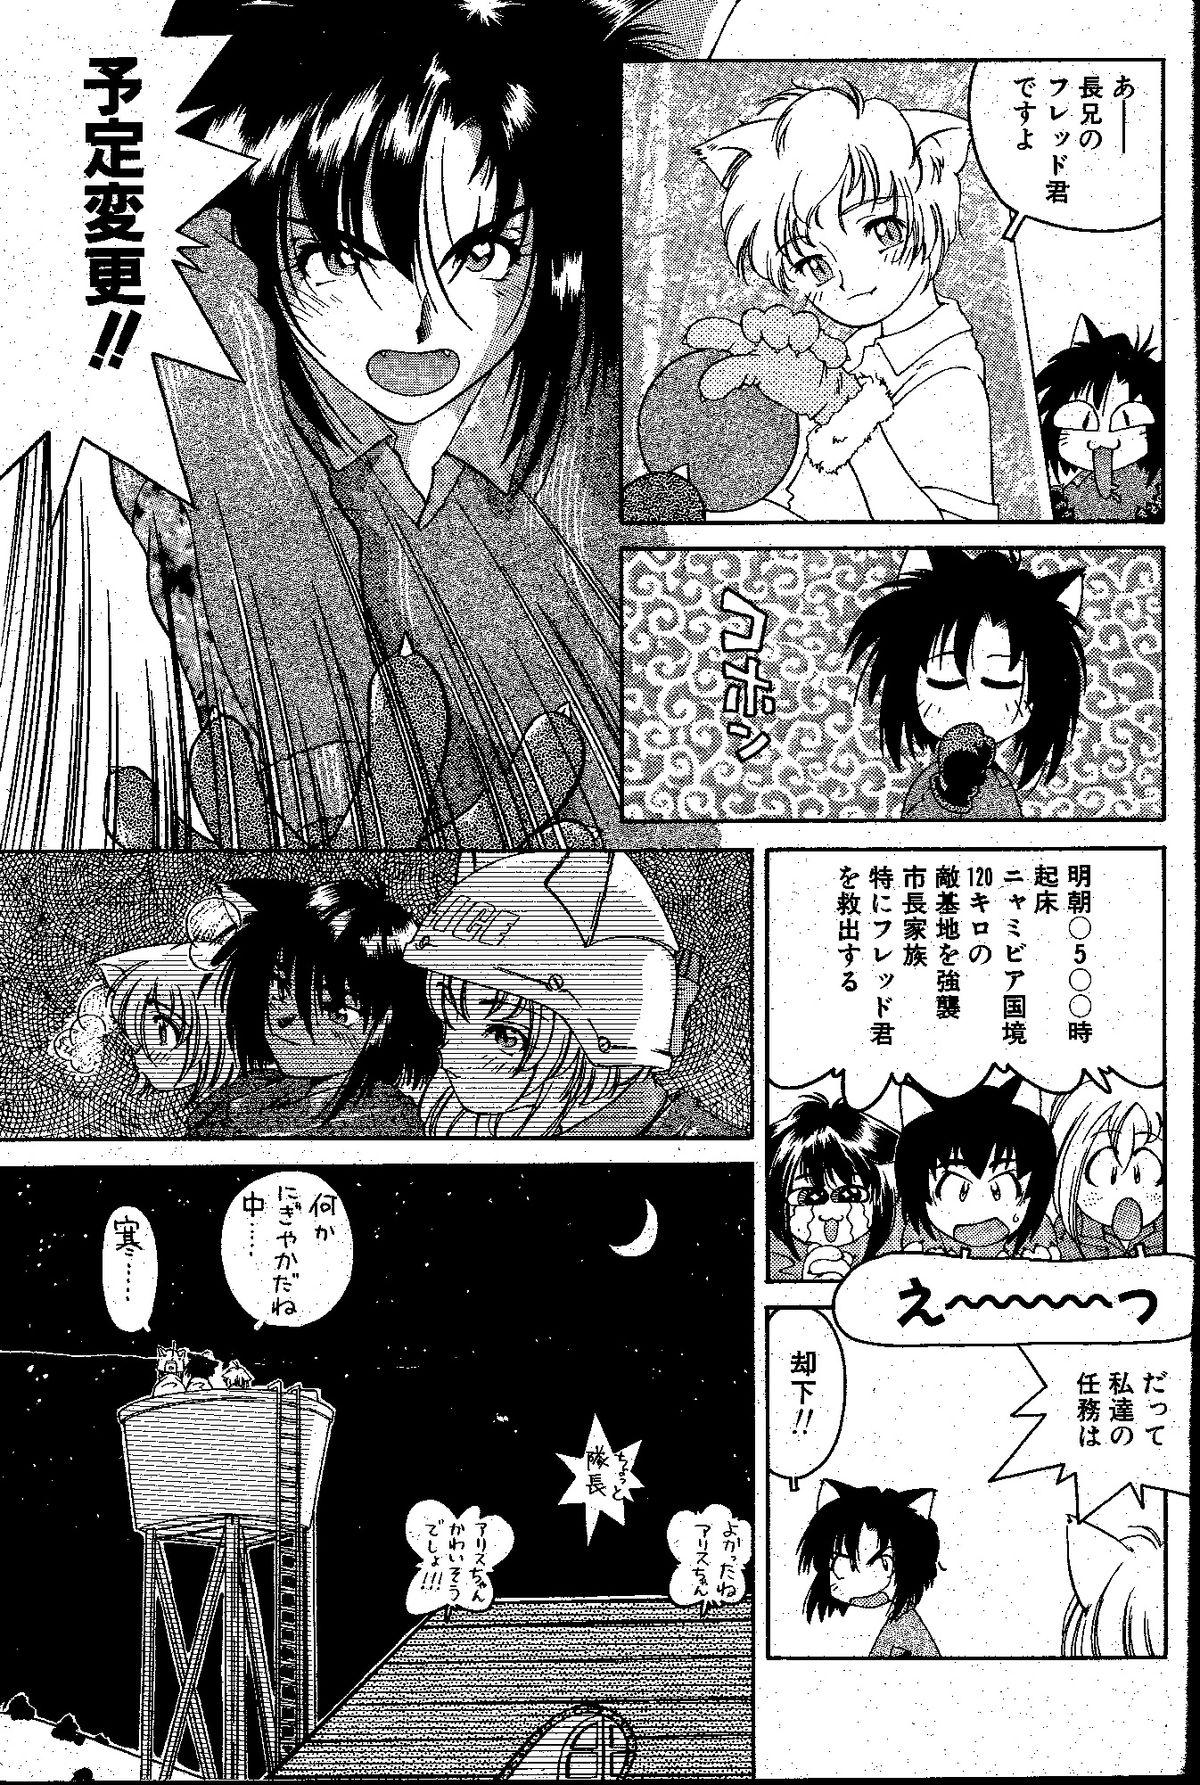 Gorgeous nyan-a-kore [Last page has imperfect lines] Group Sex - Page 7